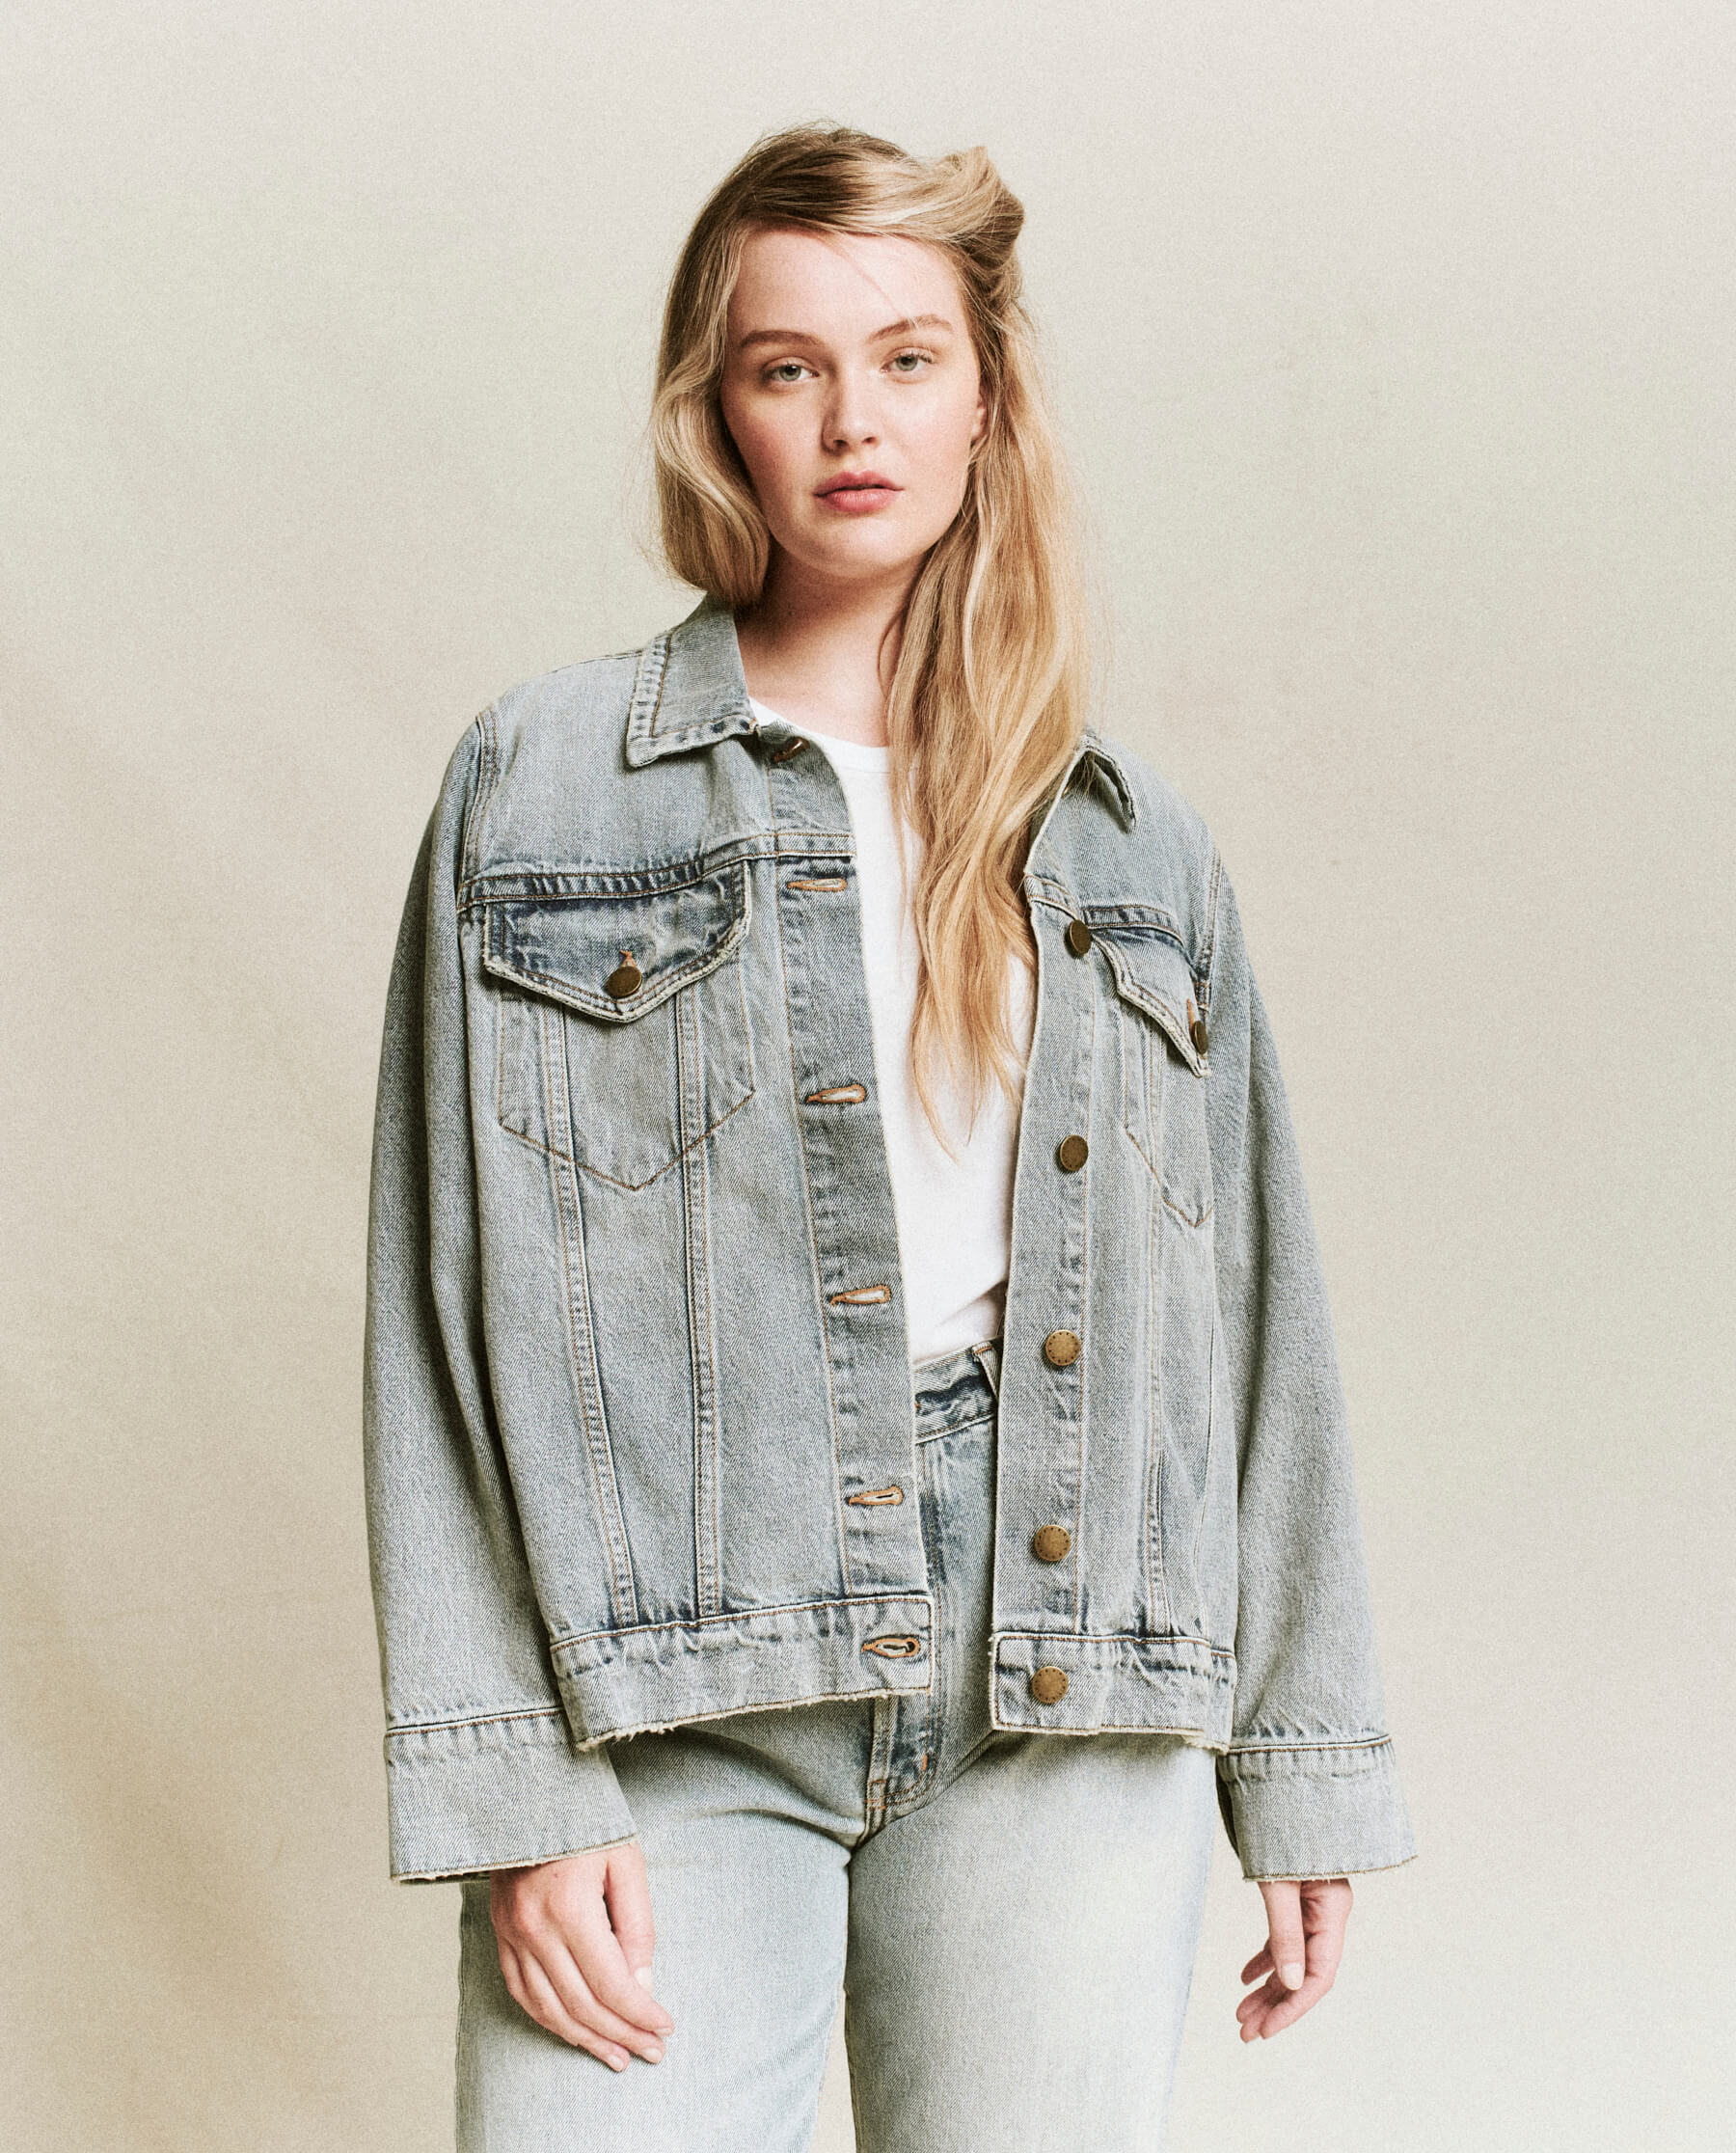 Urban Renewal Vintage Oversized Denim Jacket | Urban Outfitters Mexico -  Clothing, Music, Home & Accessories